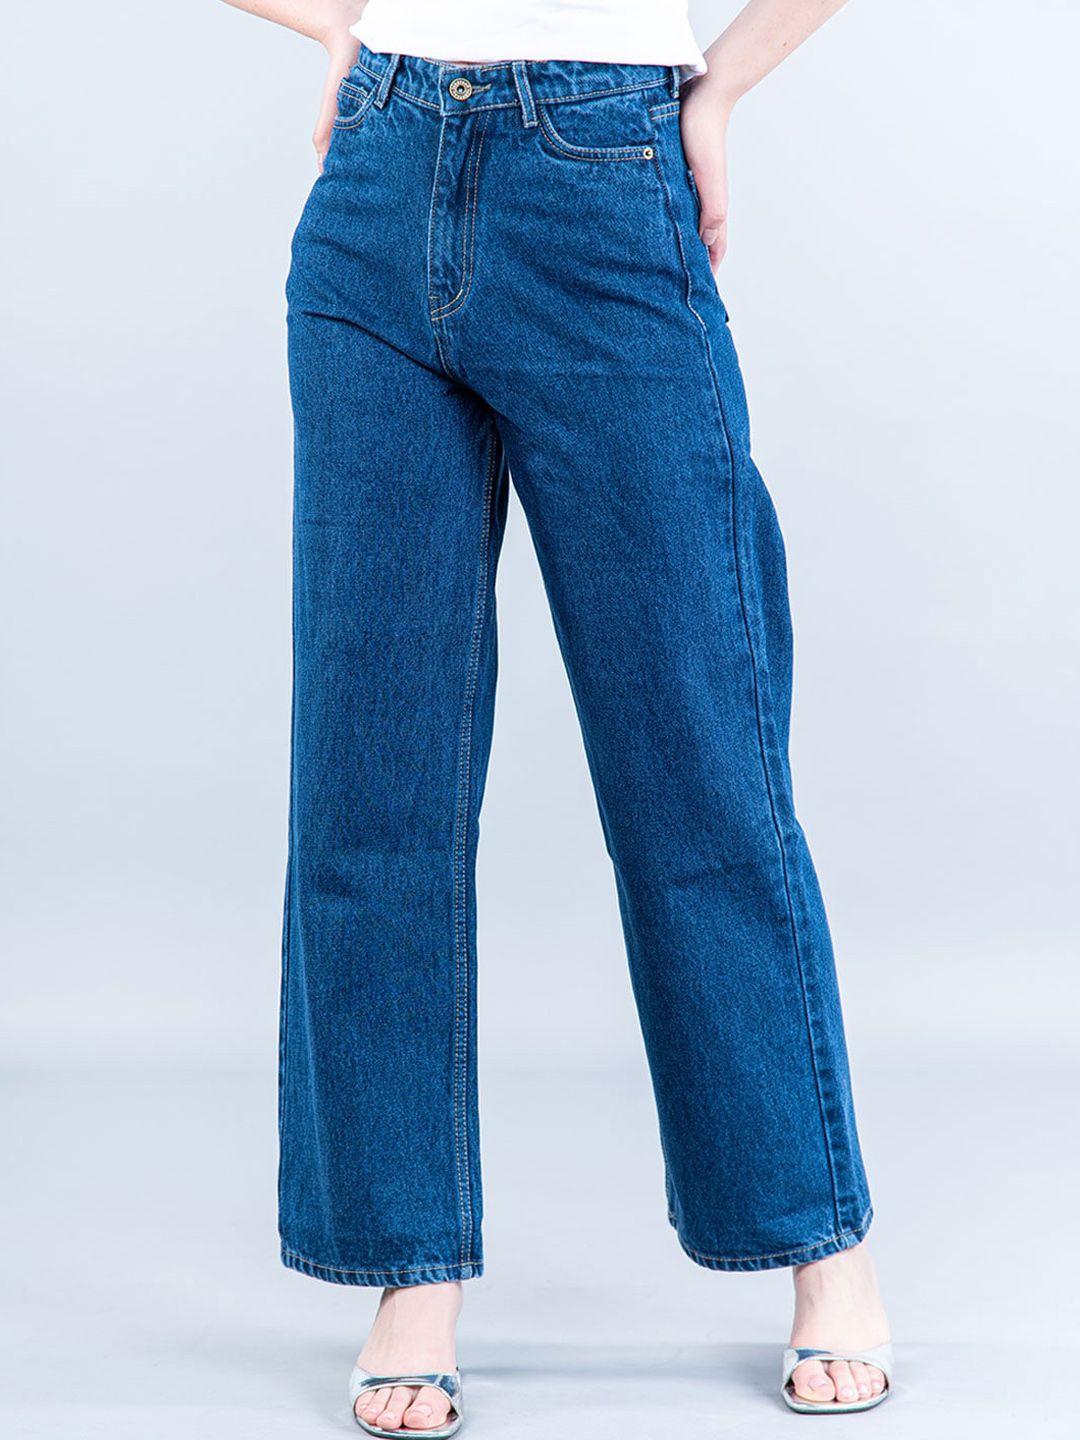 tistabene-women-comfort-flared-mid-rise-stretchable-jeans